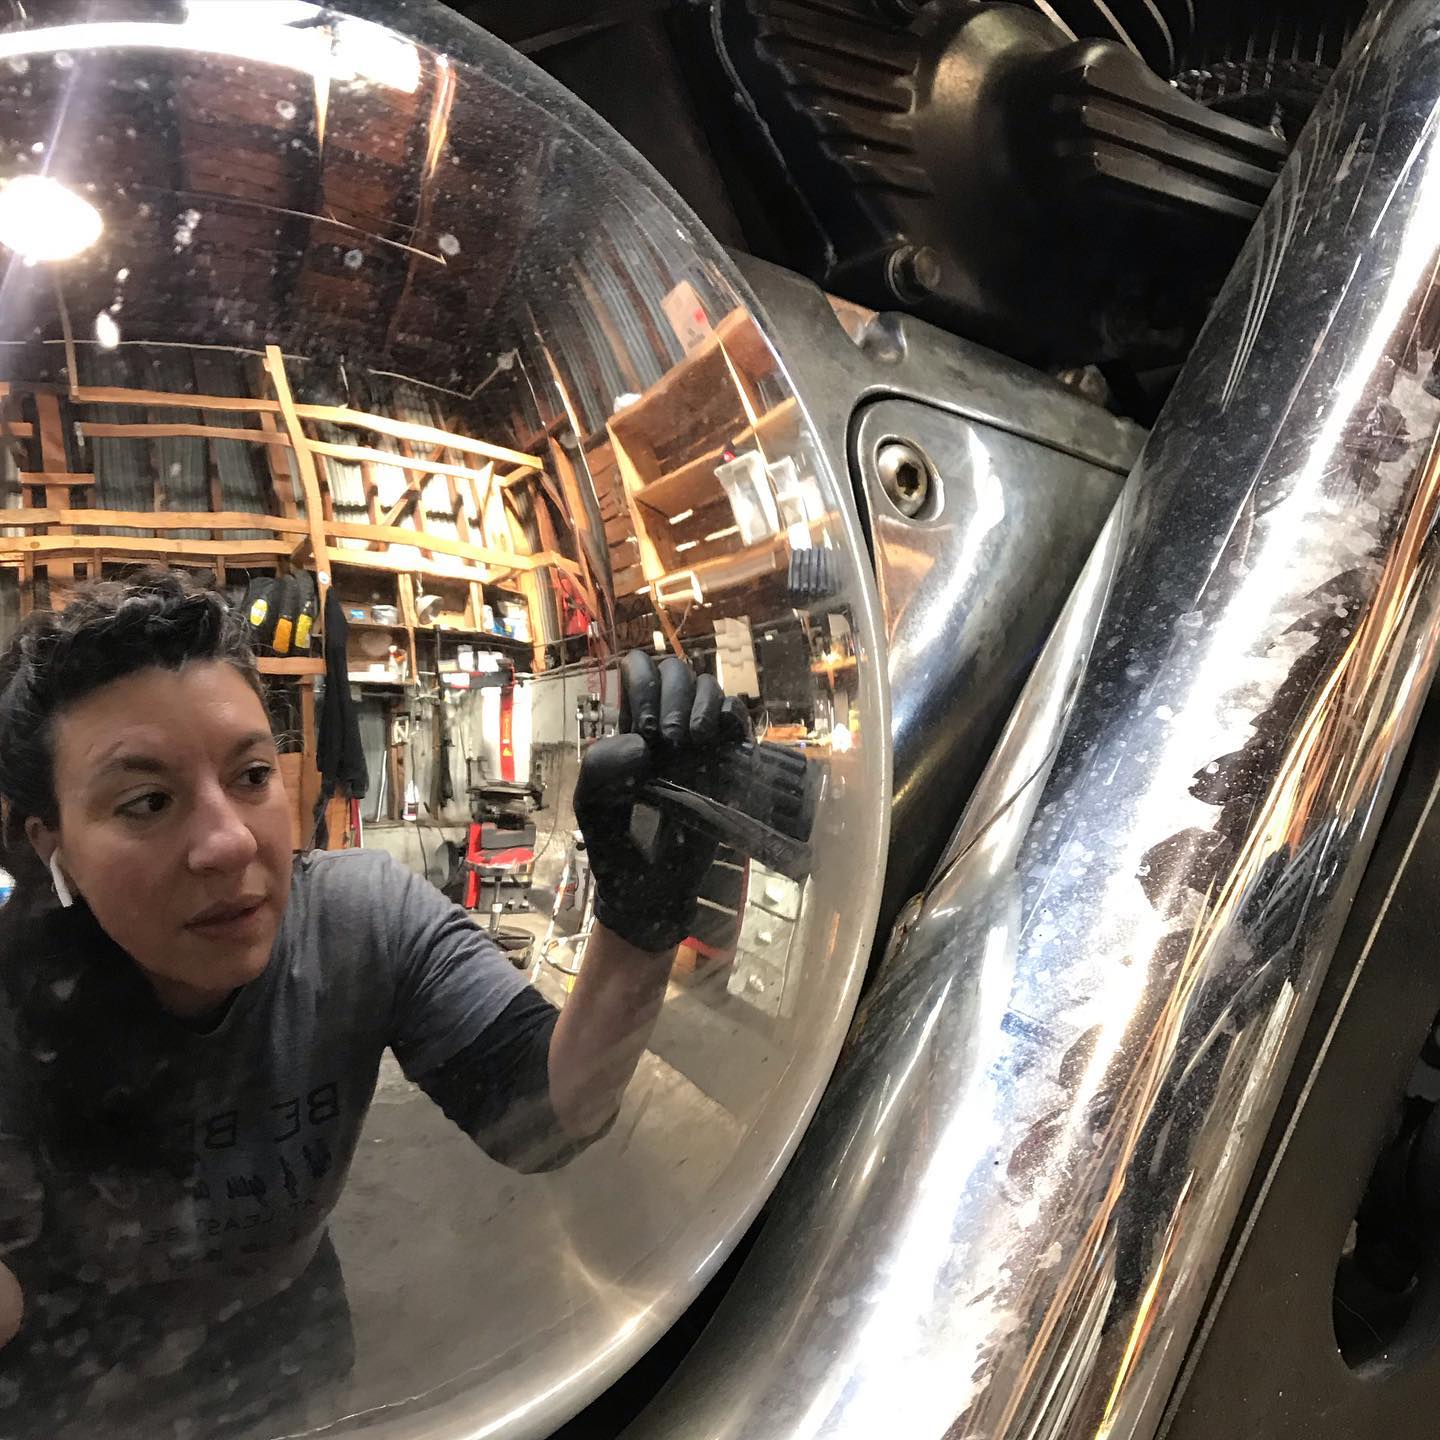 Lucy Carrera in her motorcycle repair shop, Moto Lucia.